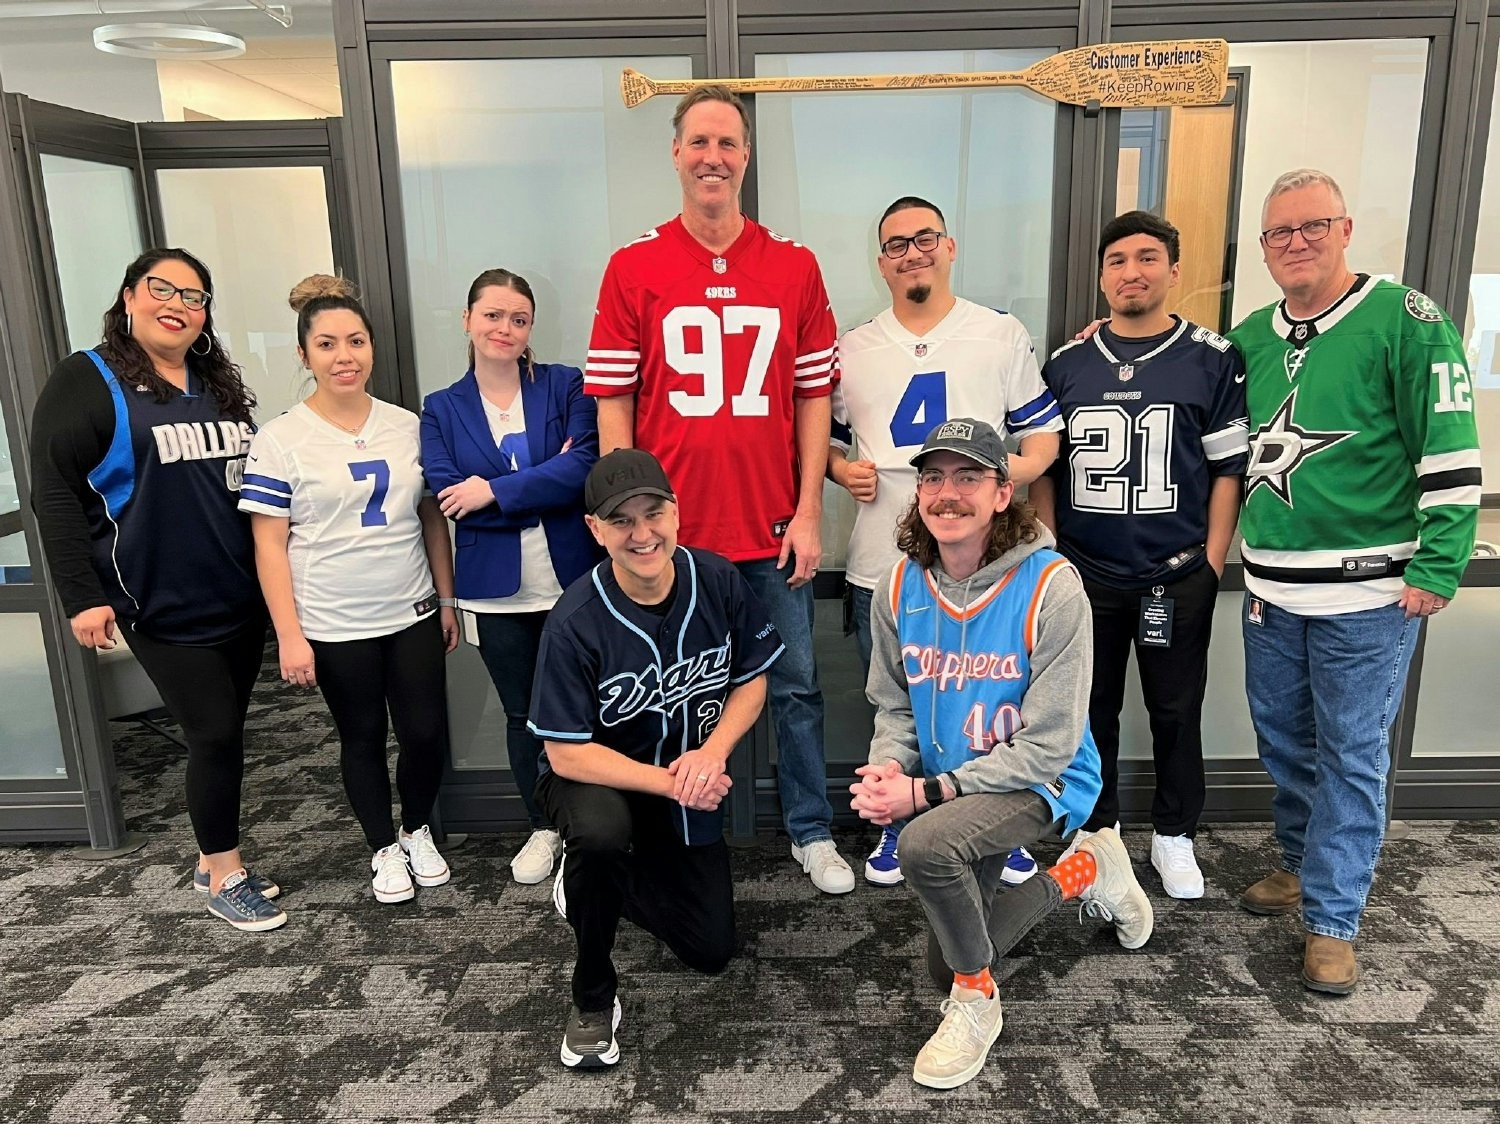 Our Customer Experience Team sporting their favorite teams on Jerz Day Thursday!